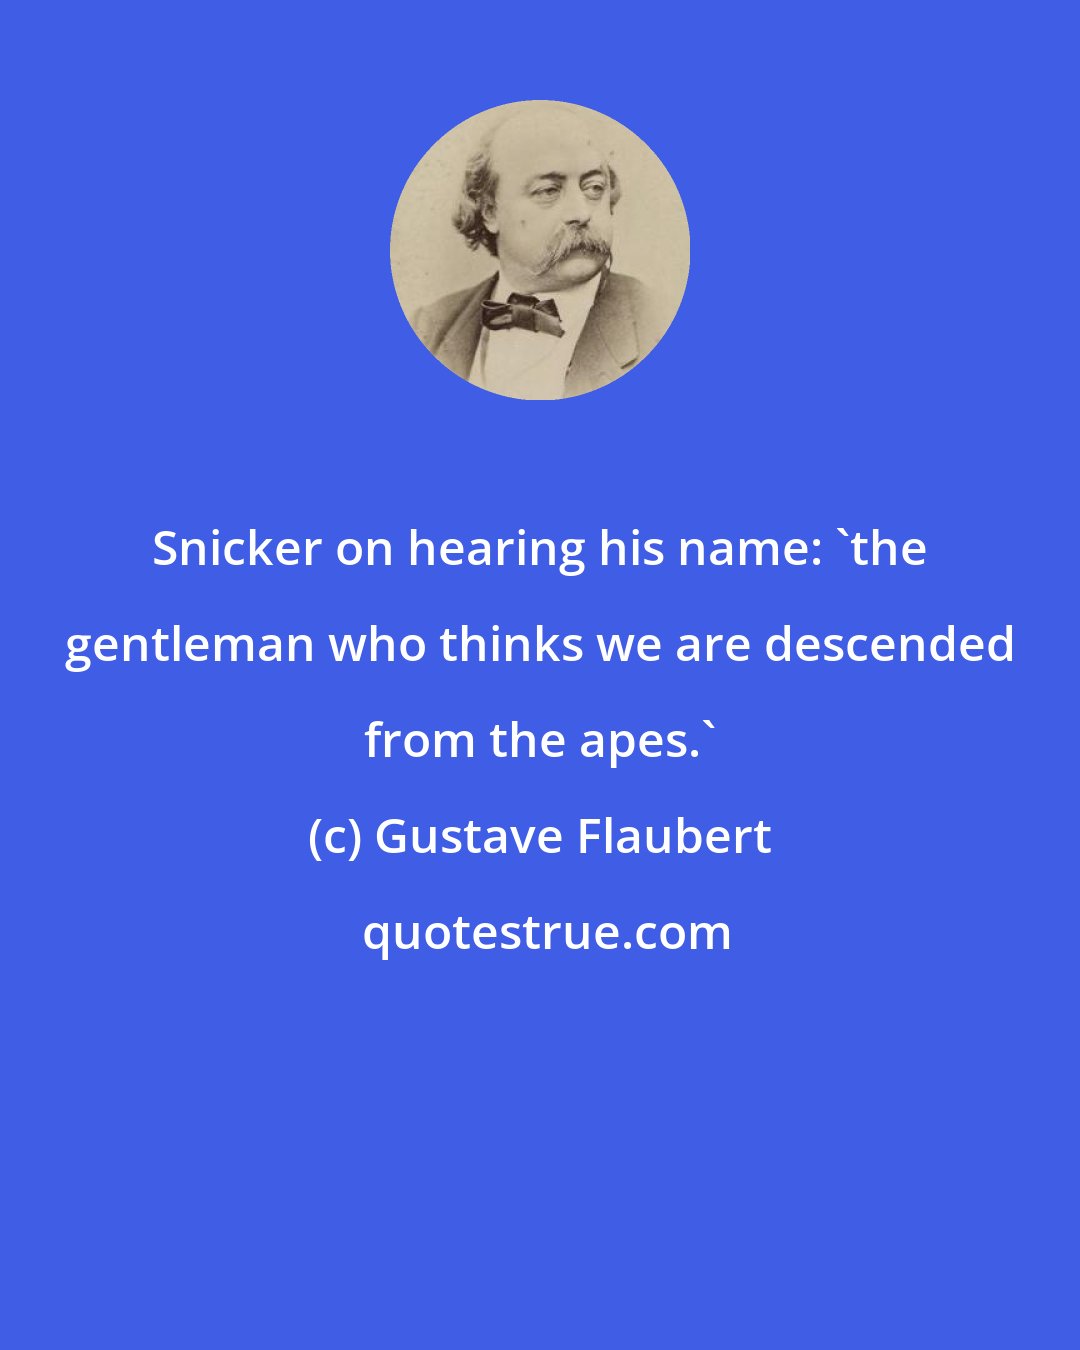 Gustave Flaubert: Snicker on hearing his name: 'the gentleman who thinks we are descended from the apes.'